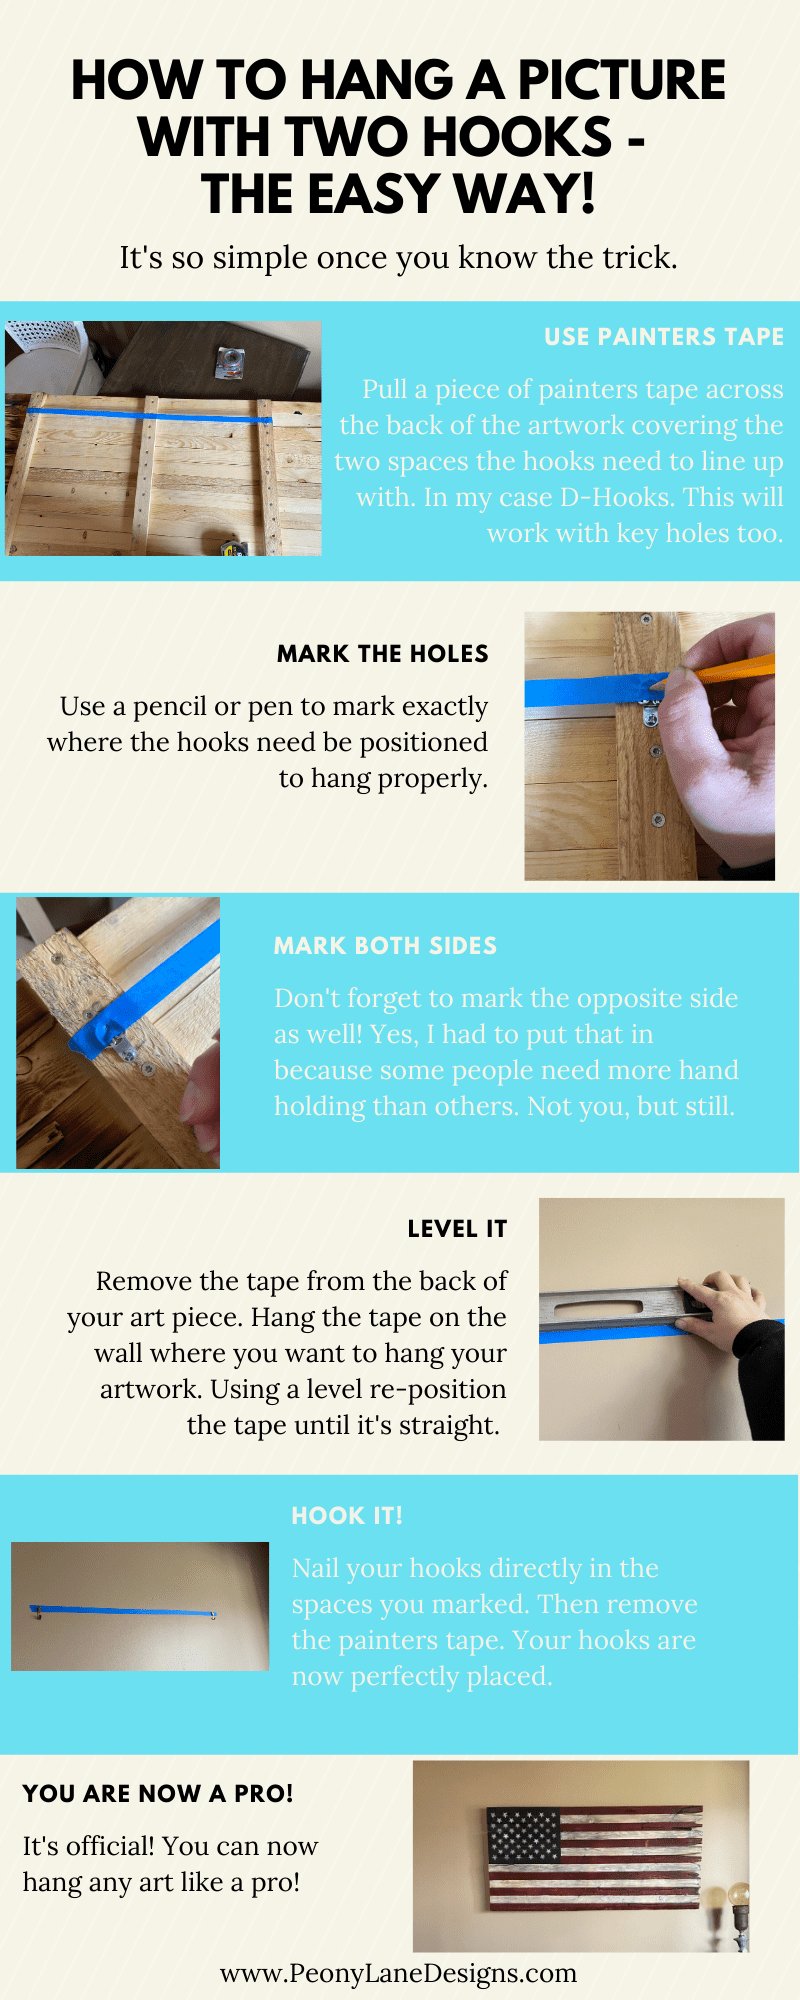 How to Hang a Picture with Two Hooks // Hang a Picture with Two Hooks // easy picture hanging ideas // picture hanging hack // hanging picture hacks // how to hang heavy picture // tricks to hanging pictures // picture hanging tips